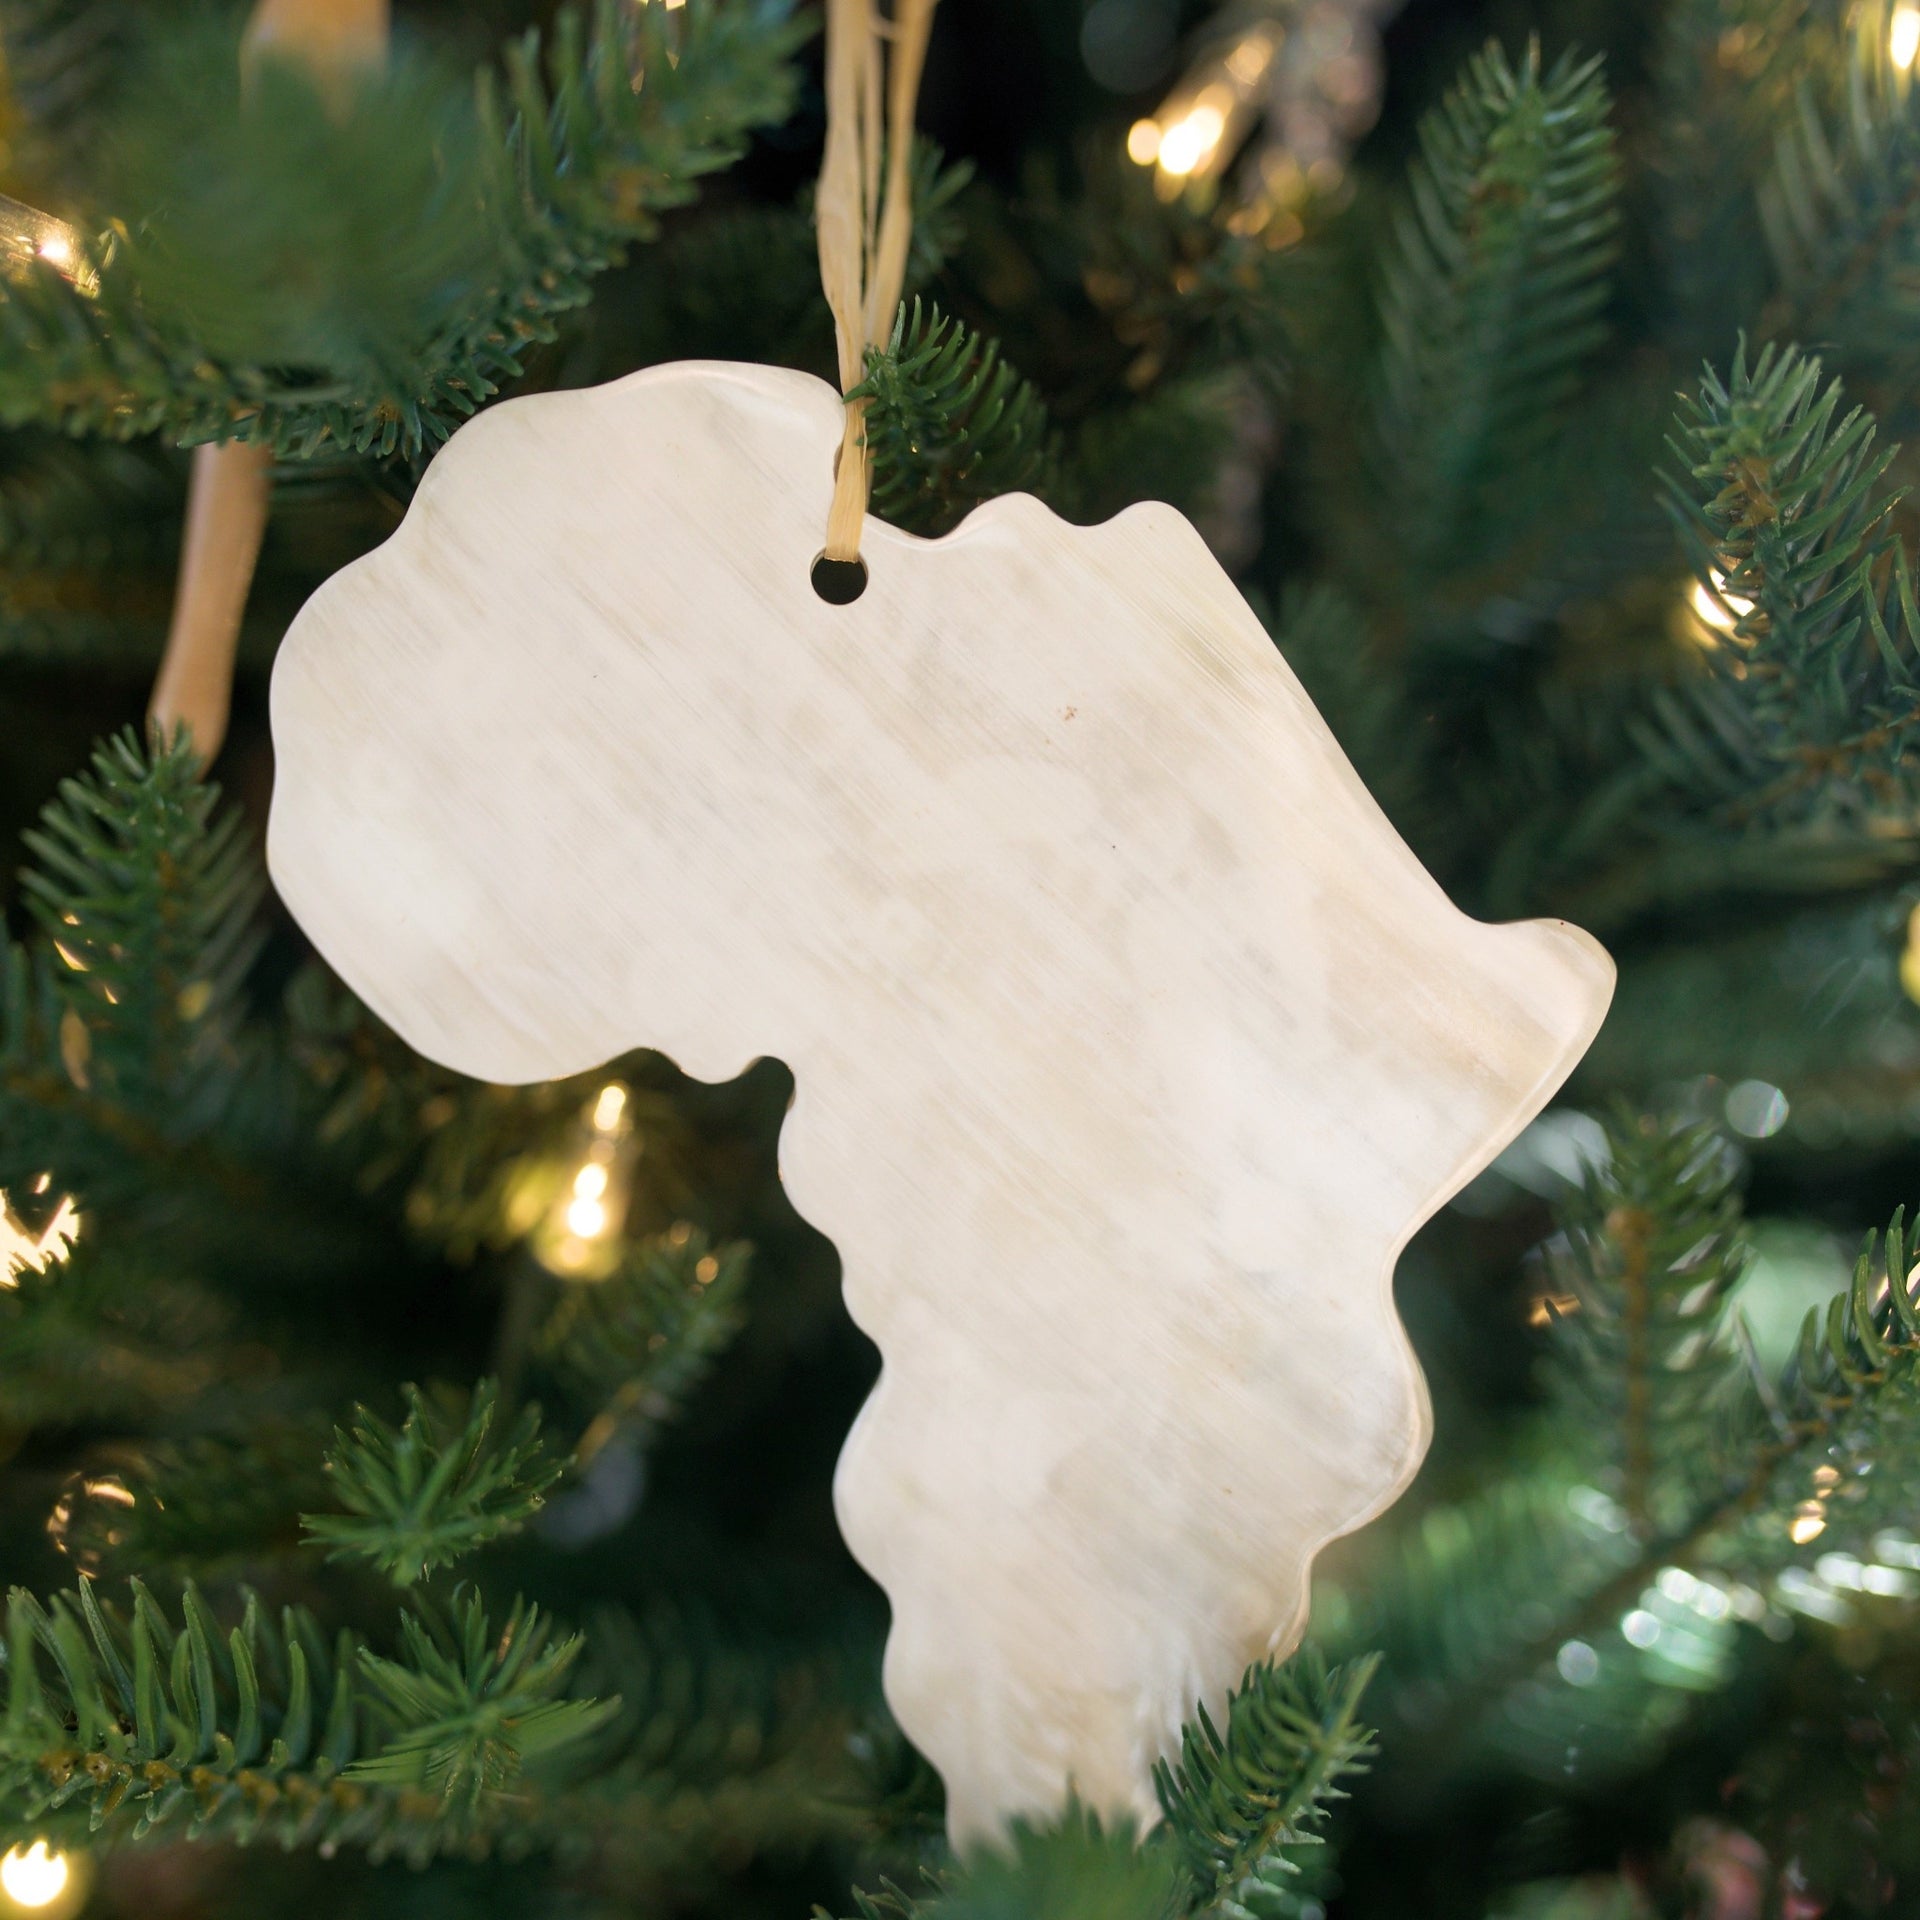 Africa Continent Christmas Ornament Gift made of Cow Horn